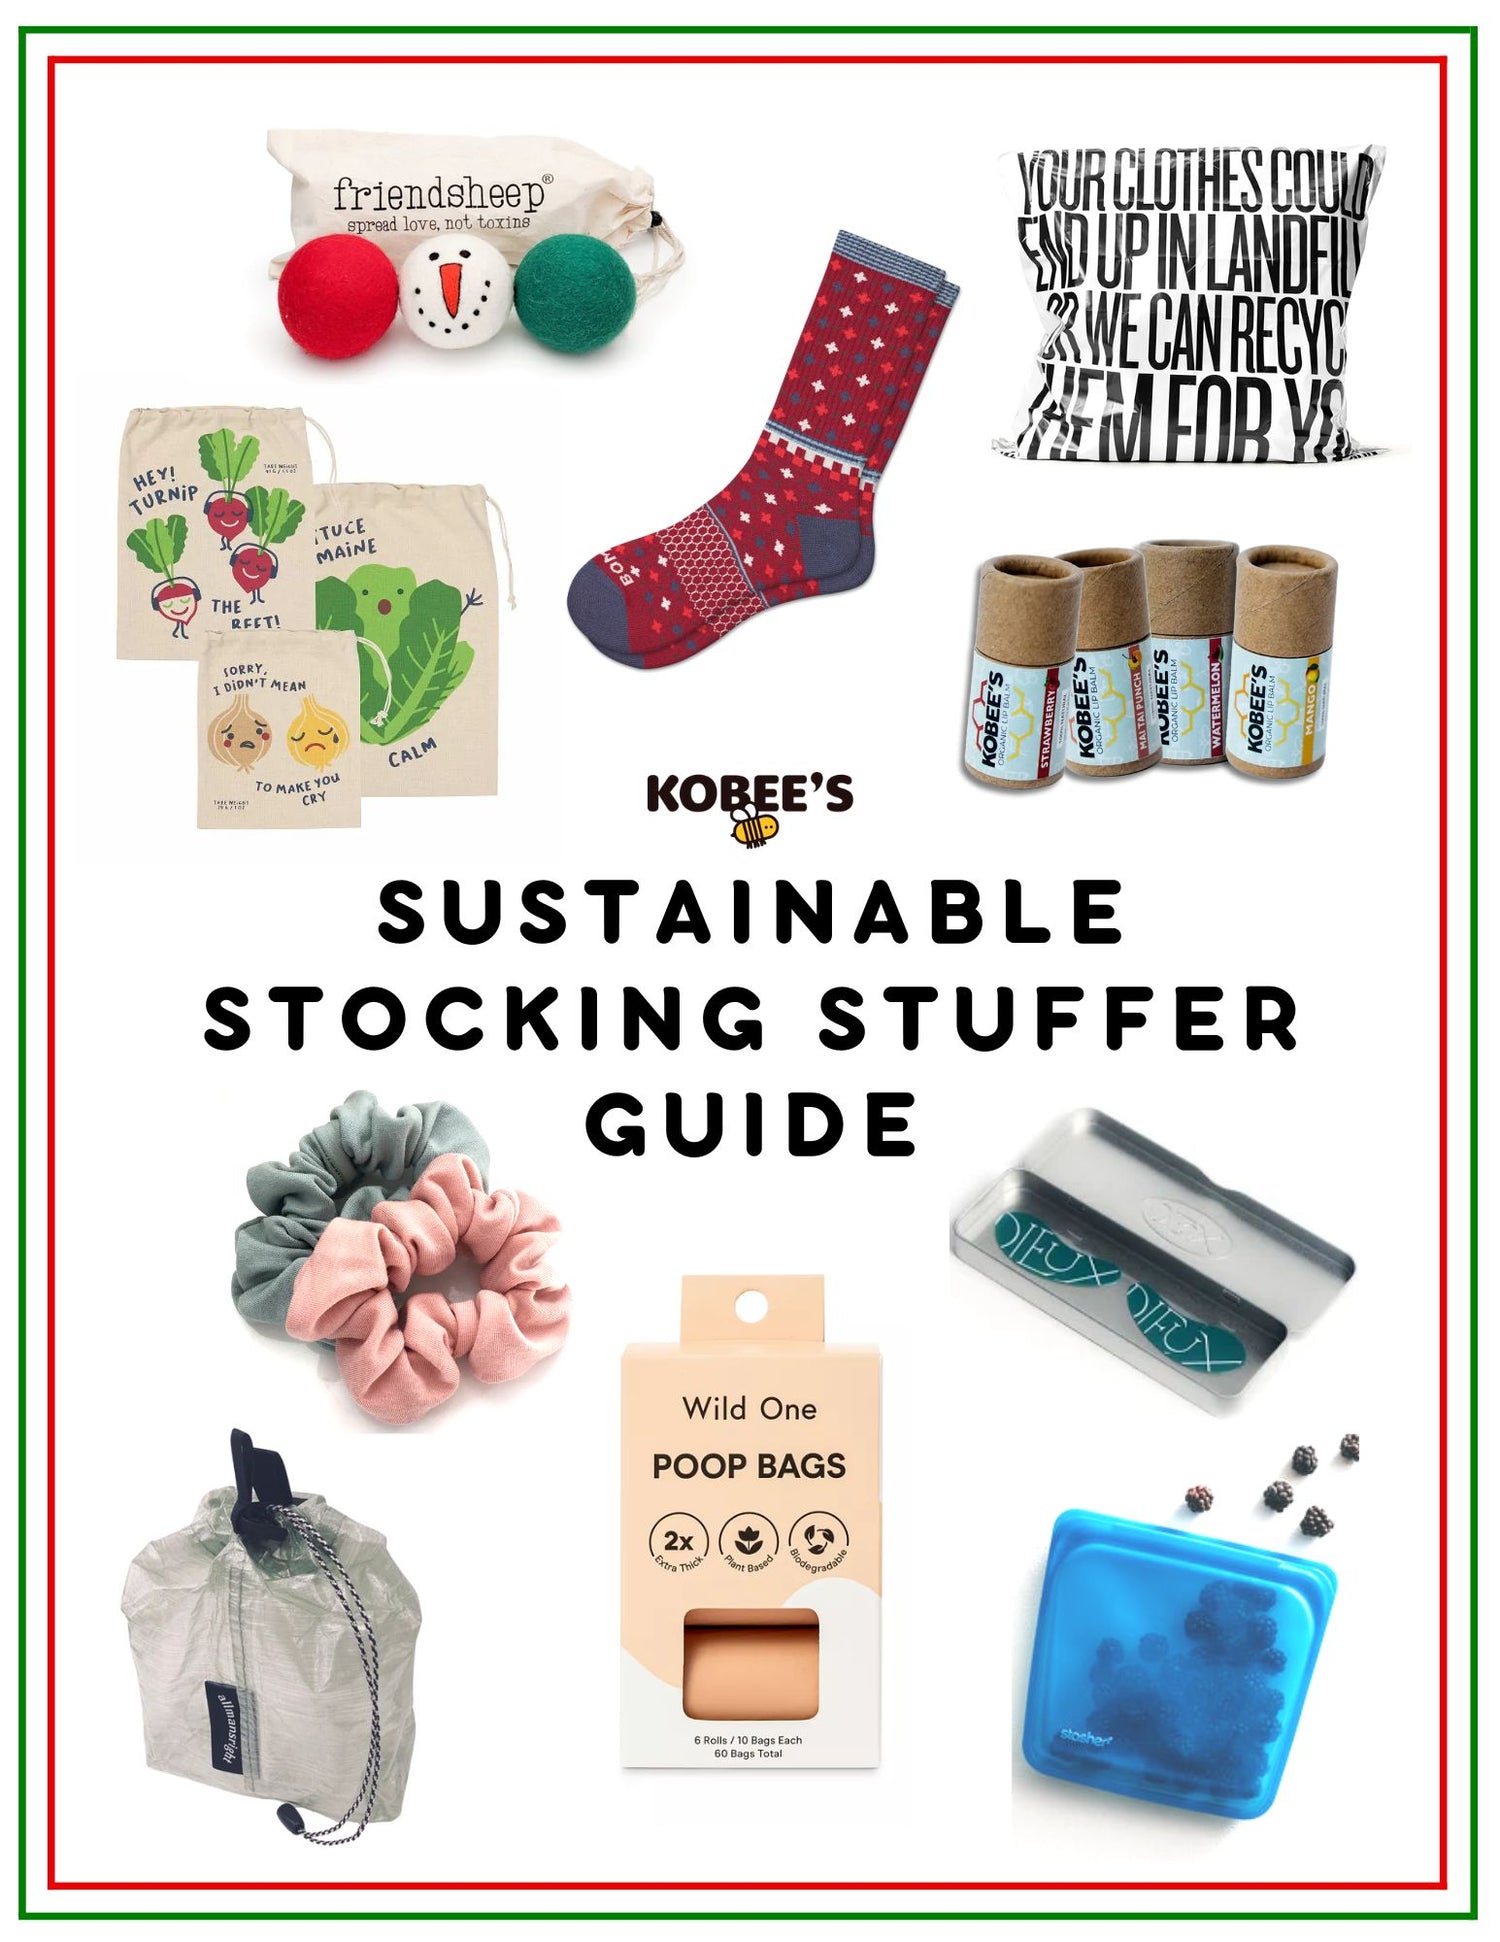 10 Sustainable Stocking Stuffers for Everyone on Your List